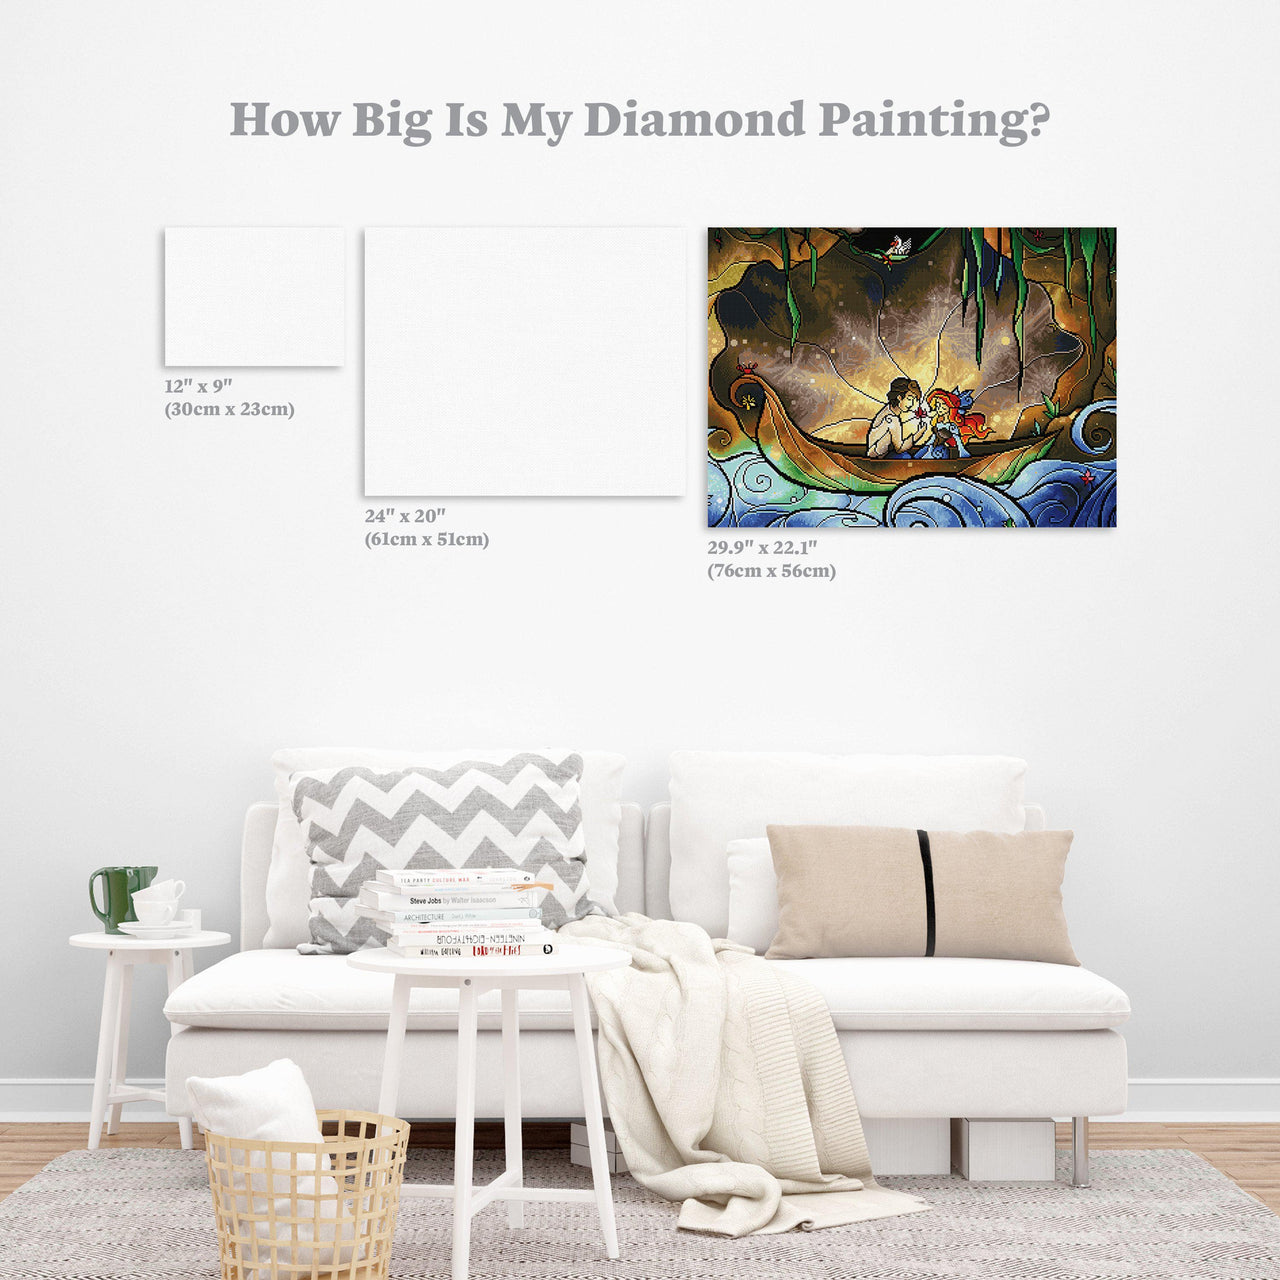 Diamond Painting Something About Her 22" x 30″ (56cm x 76cm) / Square with 50 Colors including 2 ABs